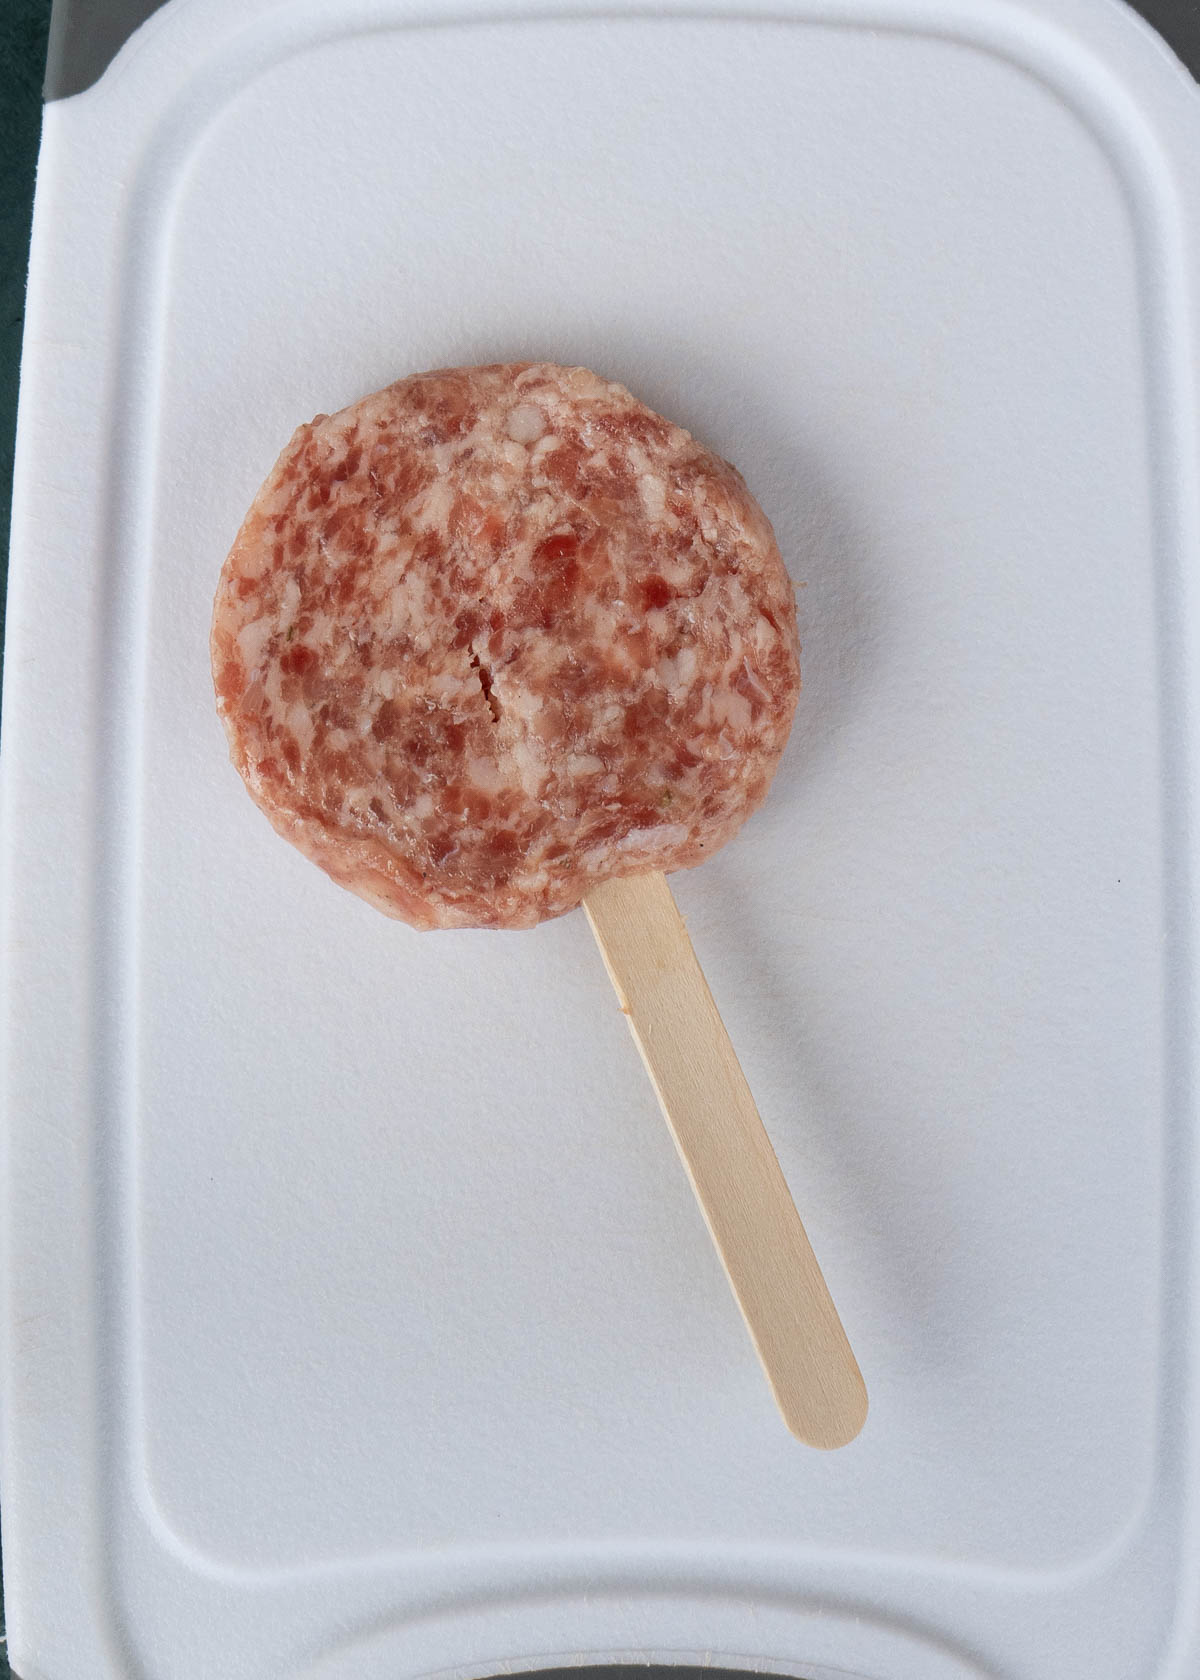 sausage patty in a Popsicle stick